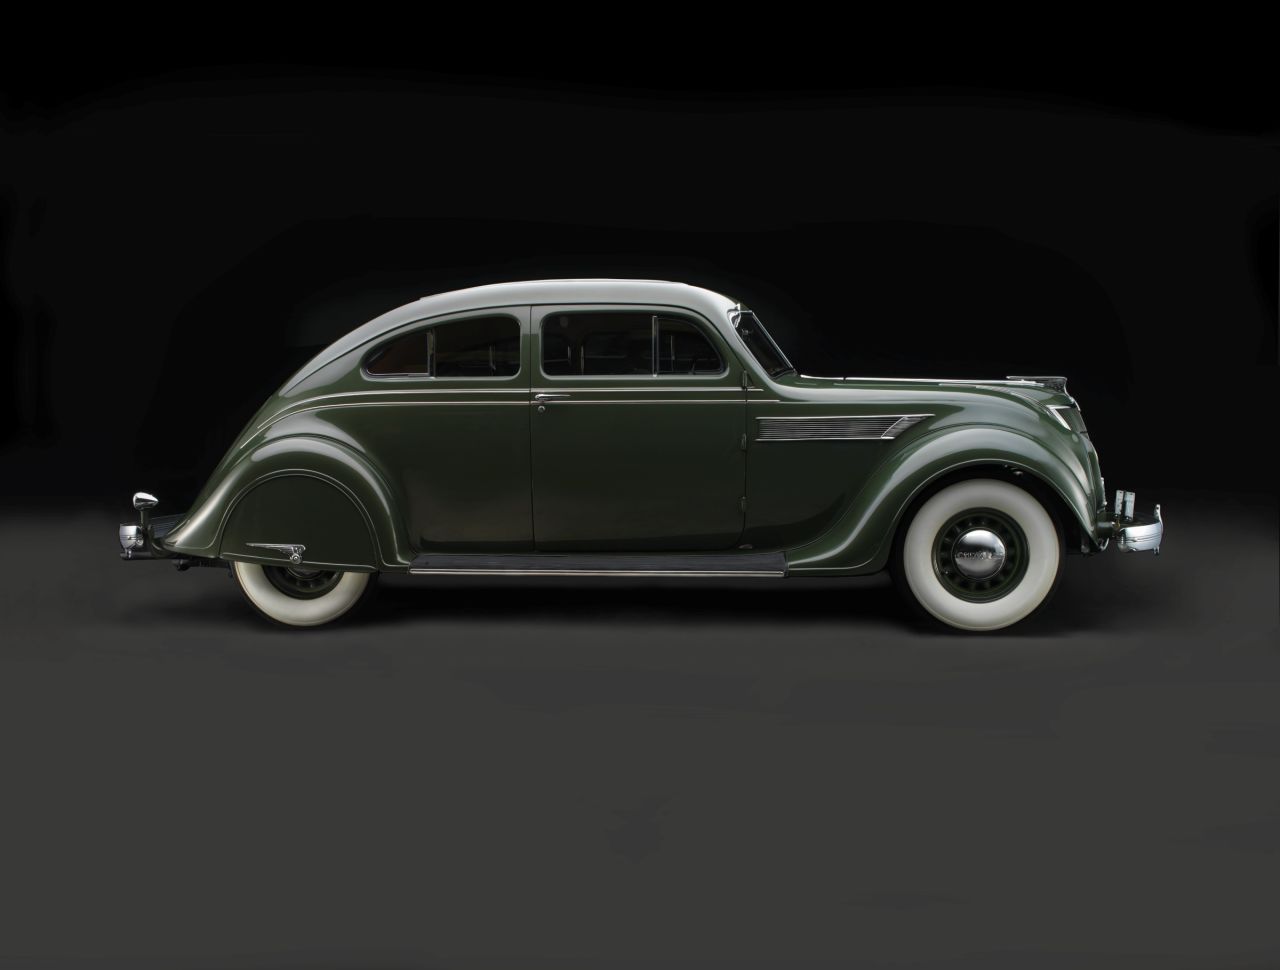 According to the event's curator Cindi Strauss, "transportation design in the first half of the 20th century affords numerous opportunities to study the global influence of style."